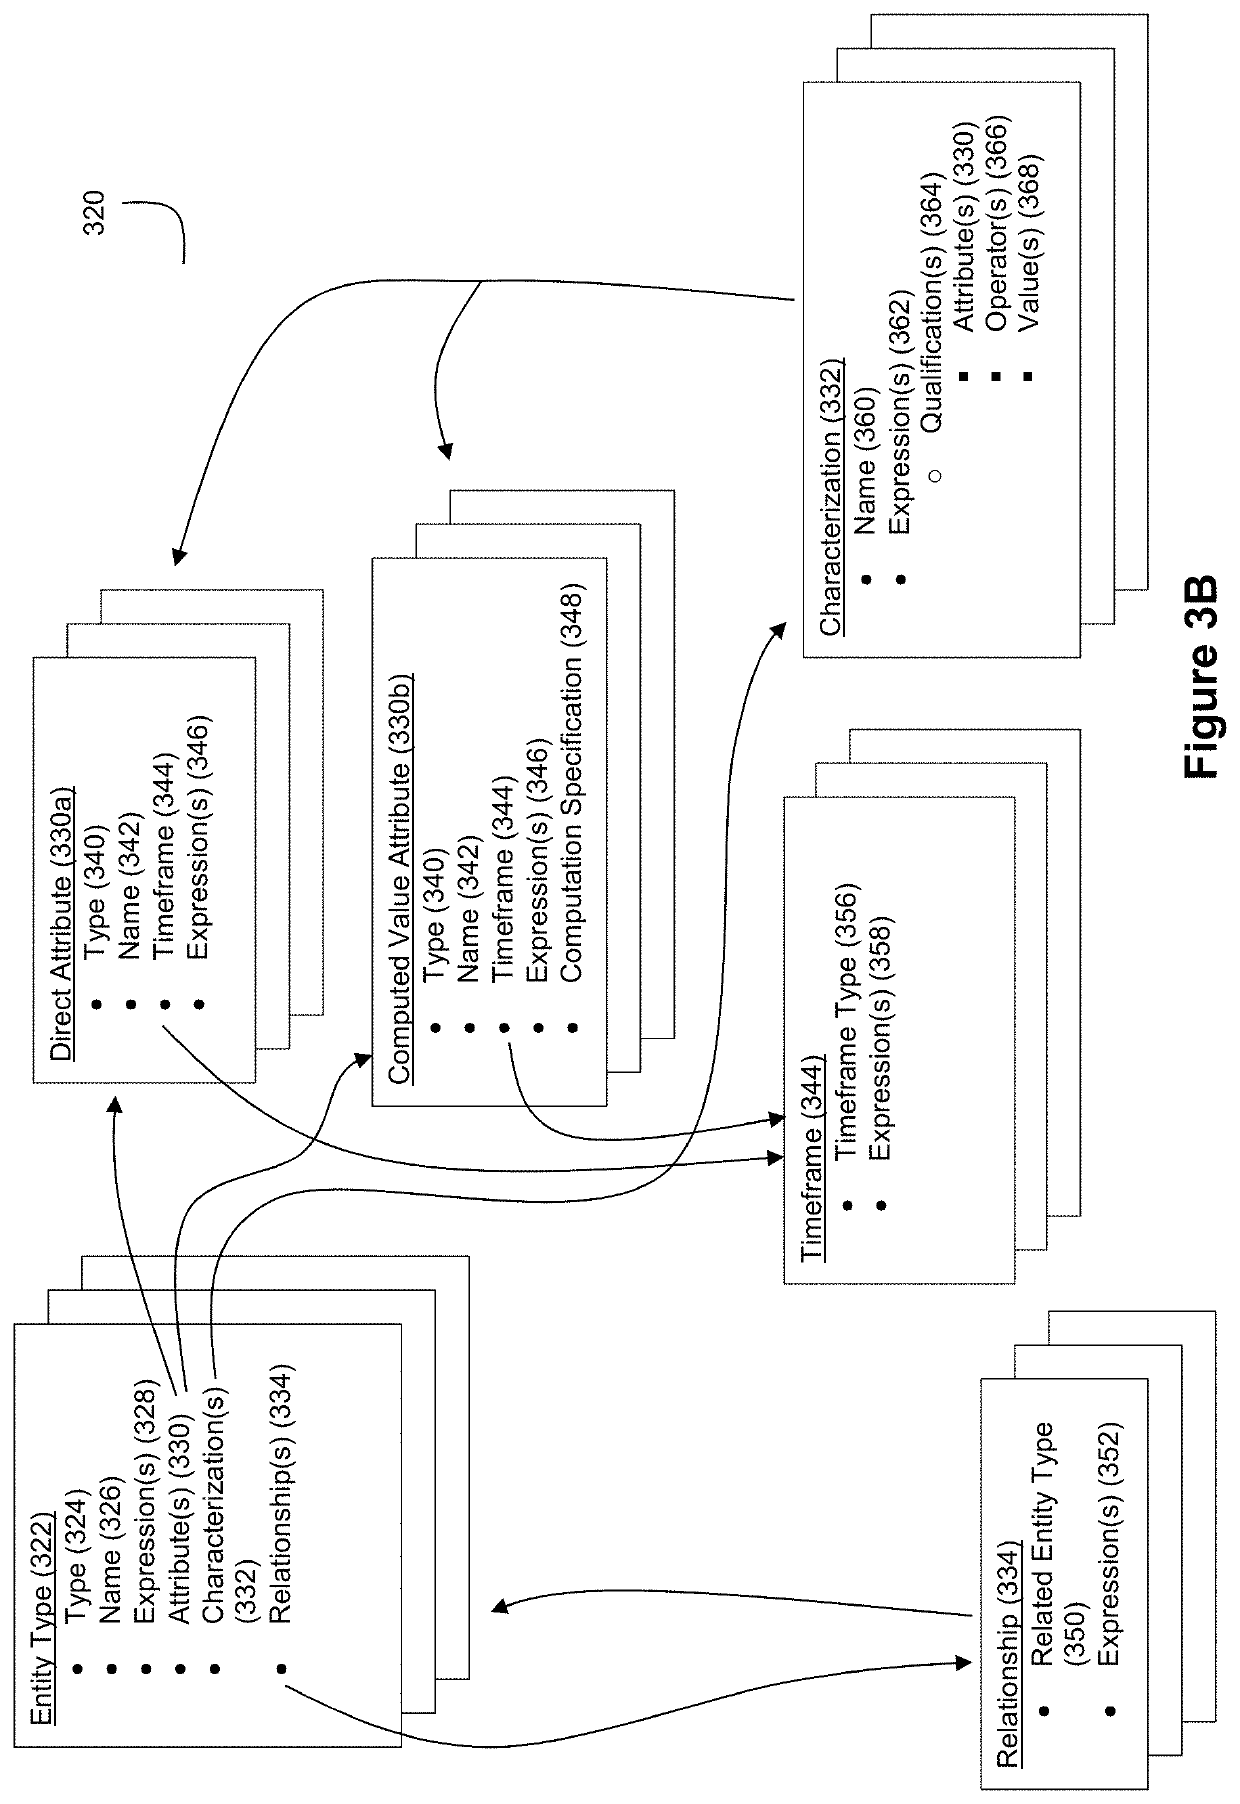 Applied Artificial Intelligence Technology for Narrative Generation Based on a Conditional Outcome Framework